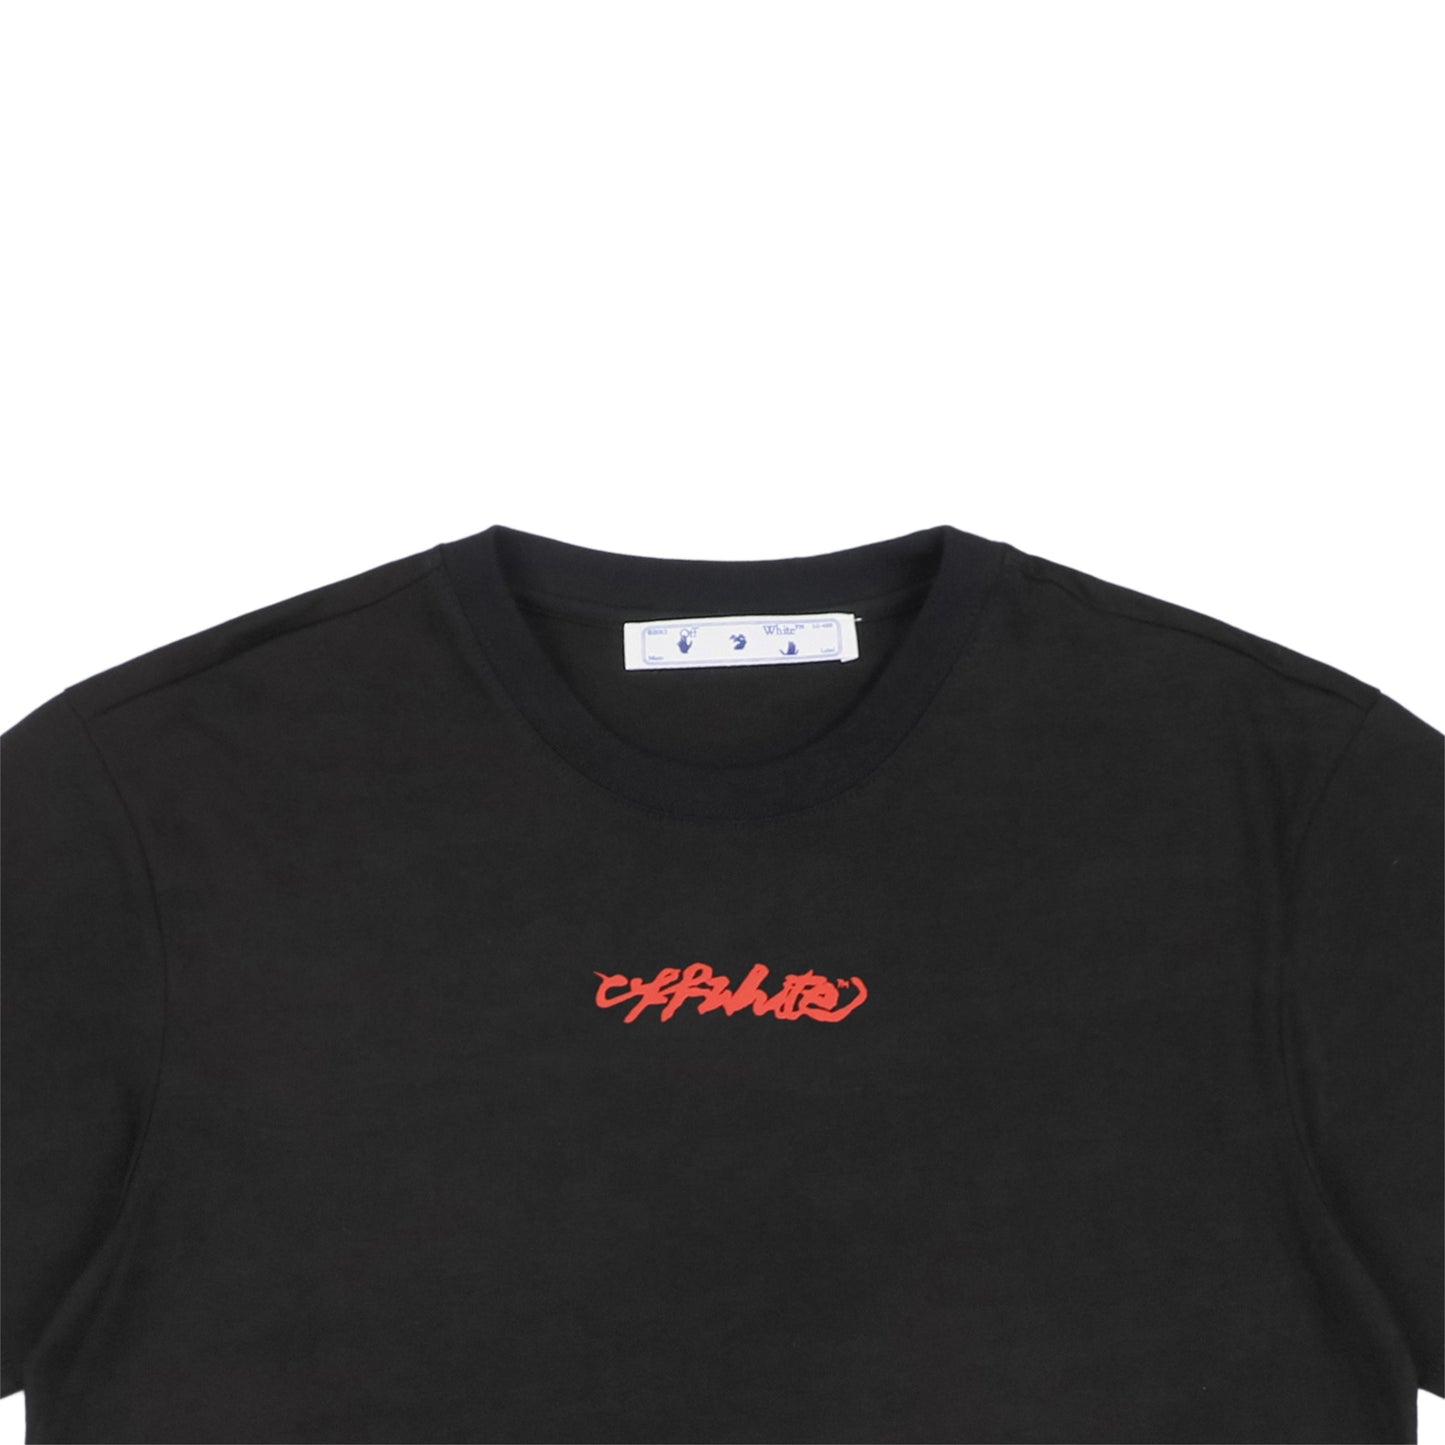 OW Black & Red T-Shirt